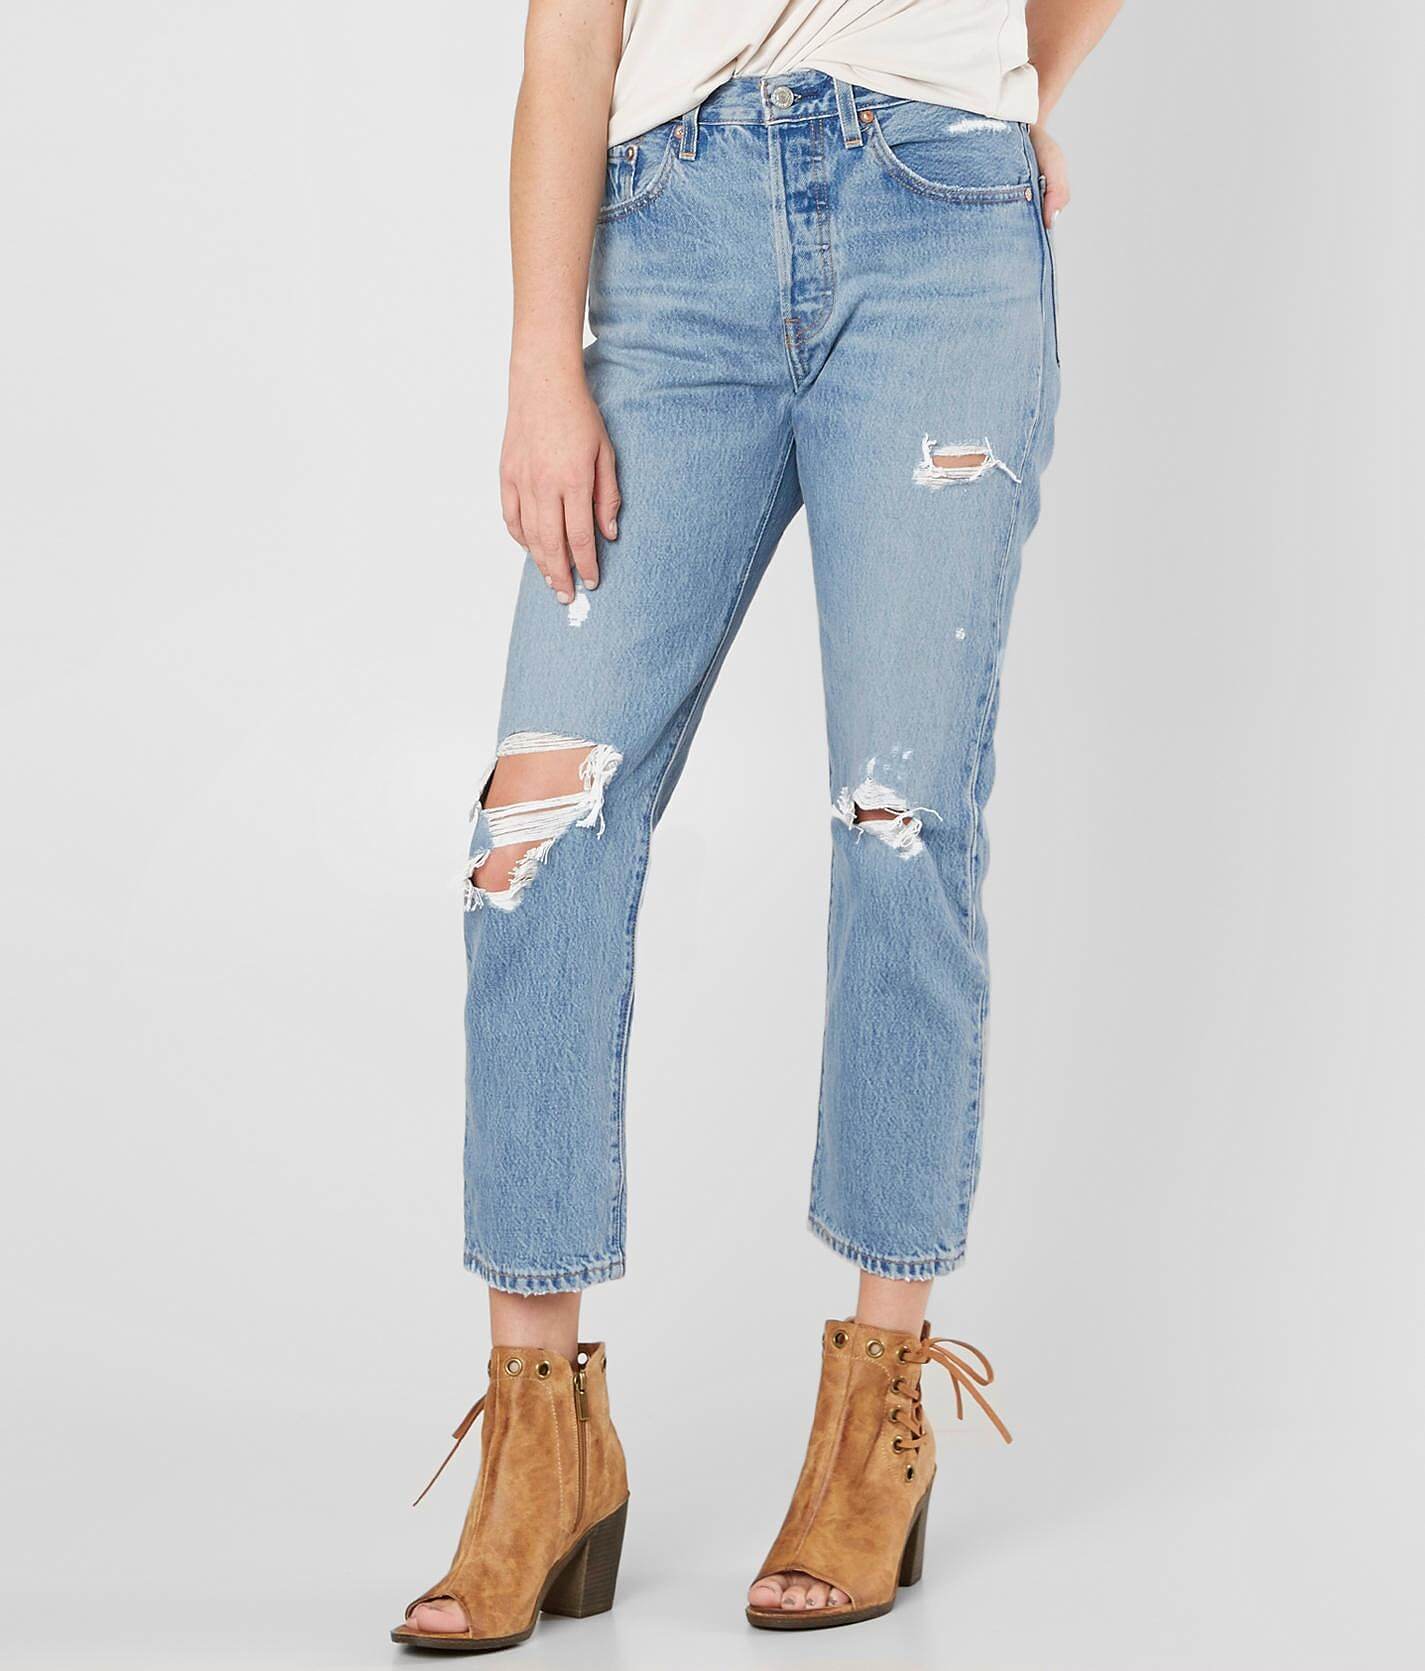 levi's 501 authentically yours